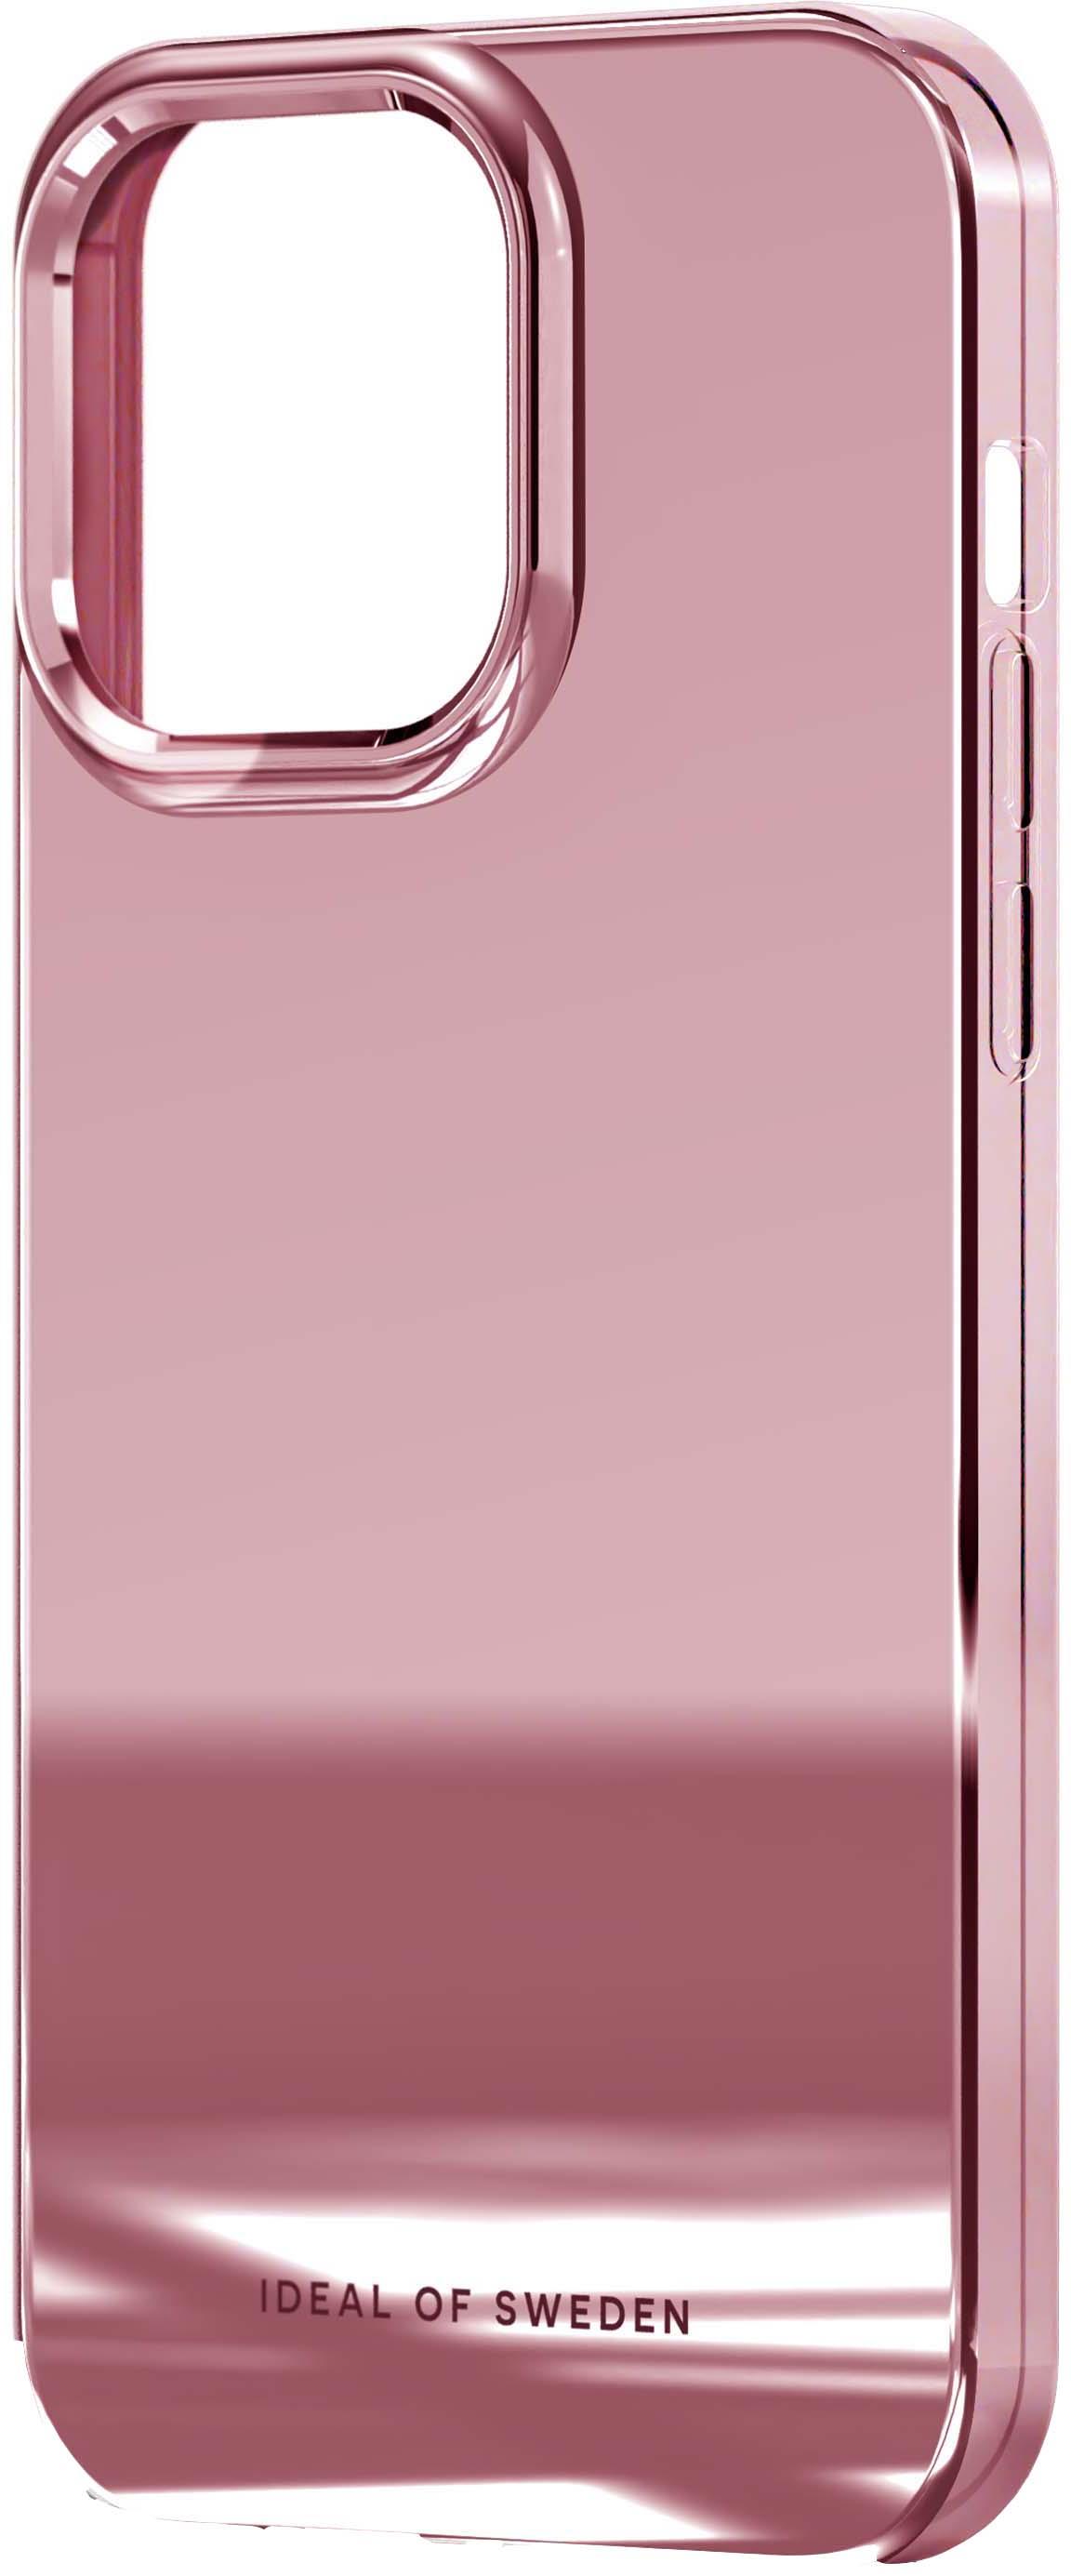 iDeal of Sweden - Fashion Case Cover - Pink Marble - iPhone XS Max - iPhone  Case - New Fashion Collection - Avvenice